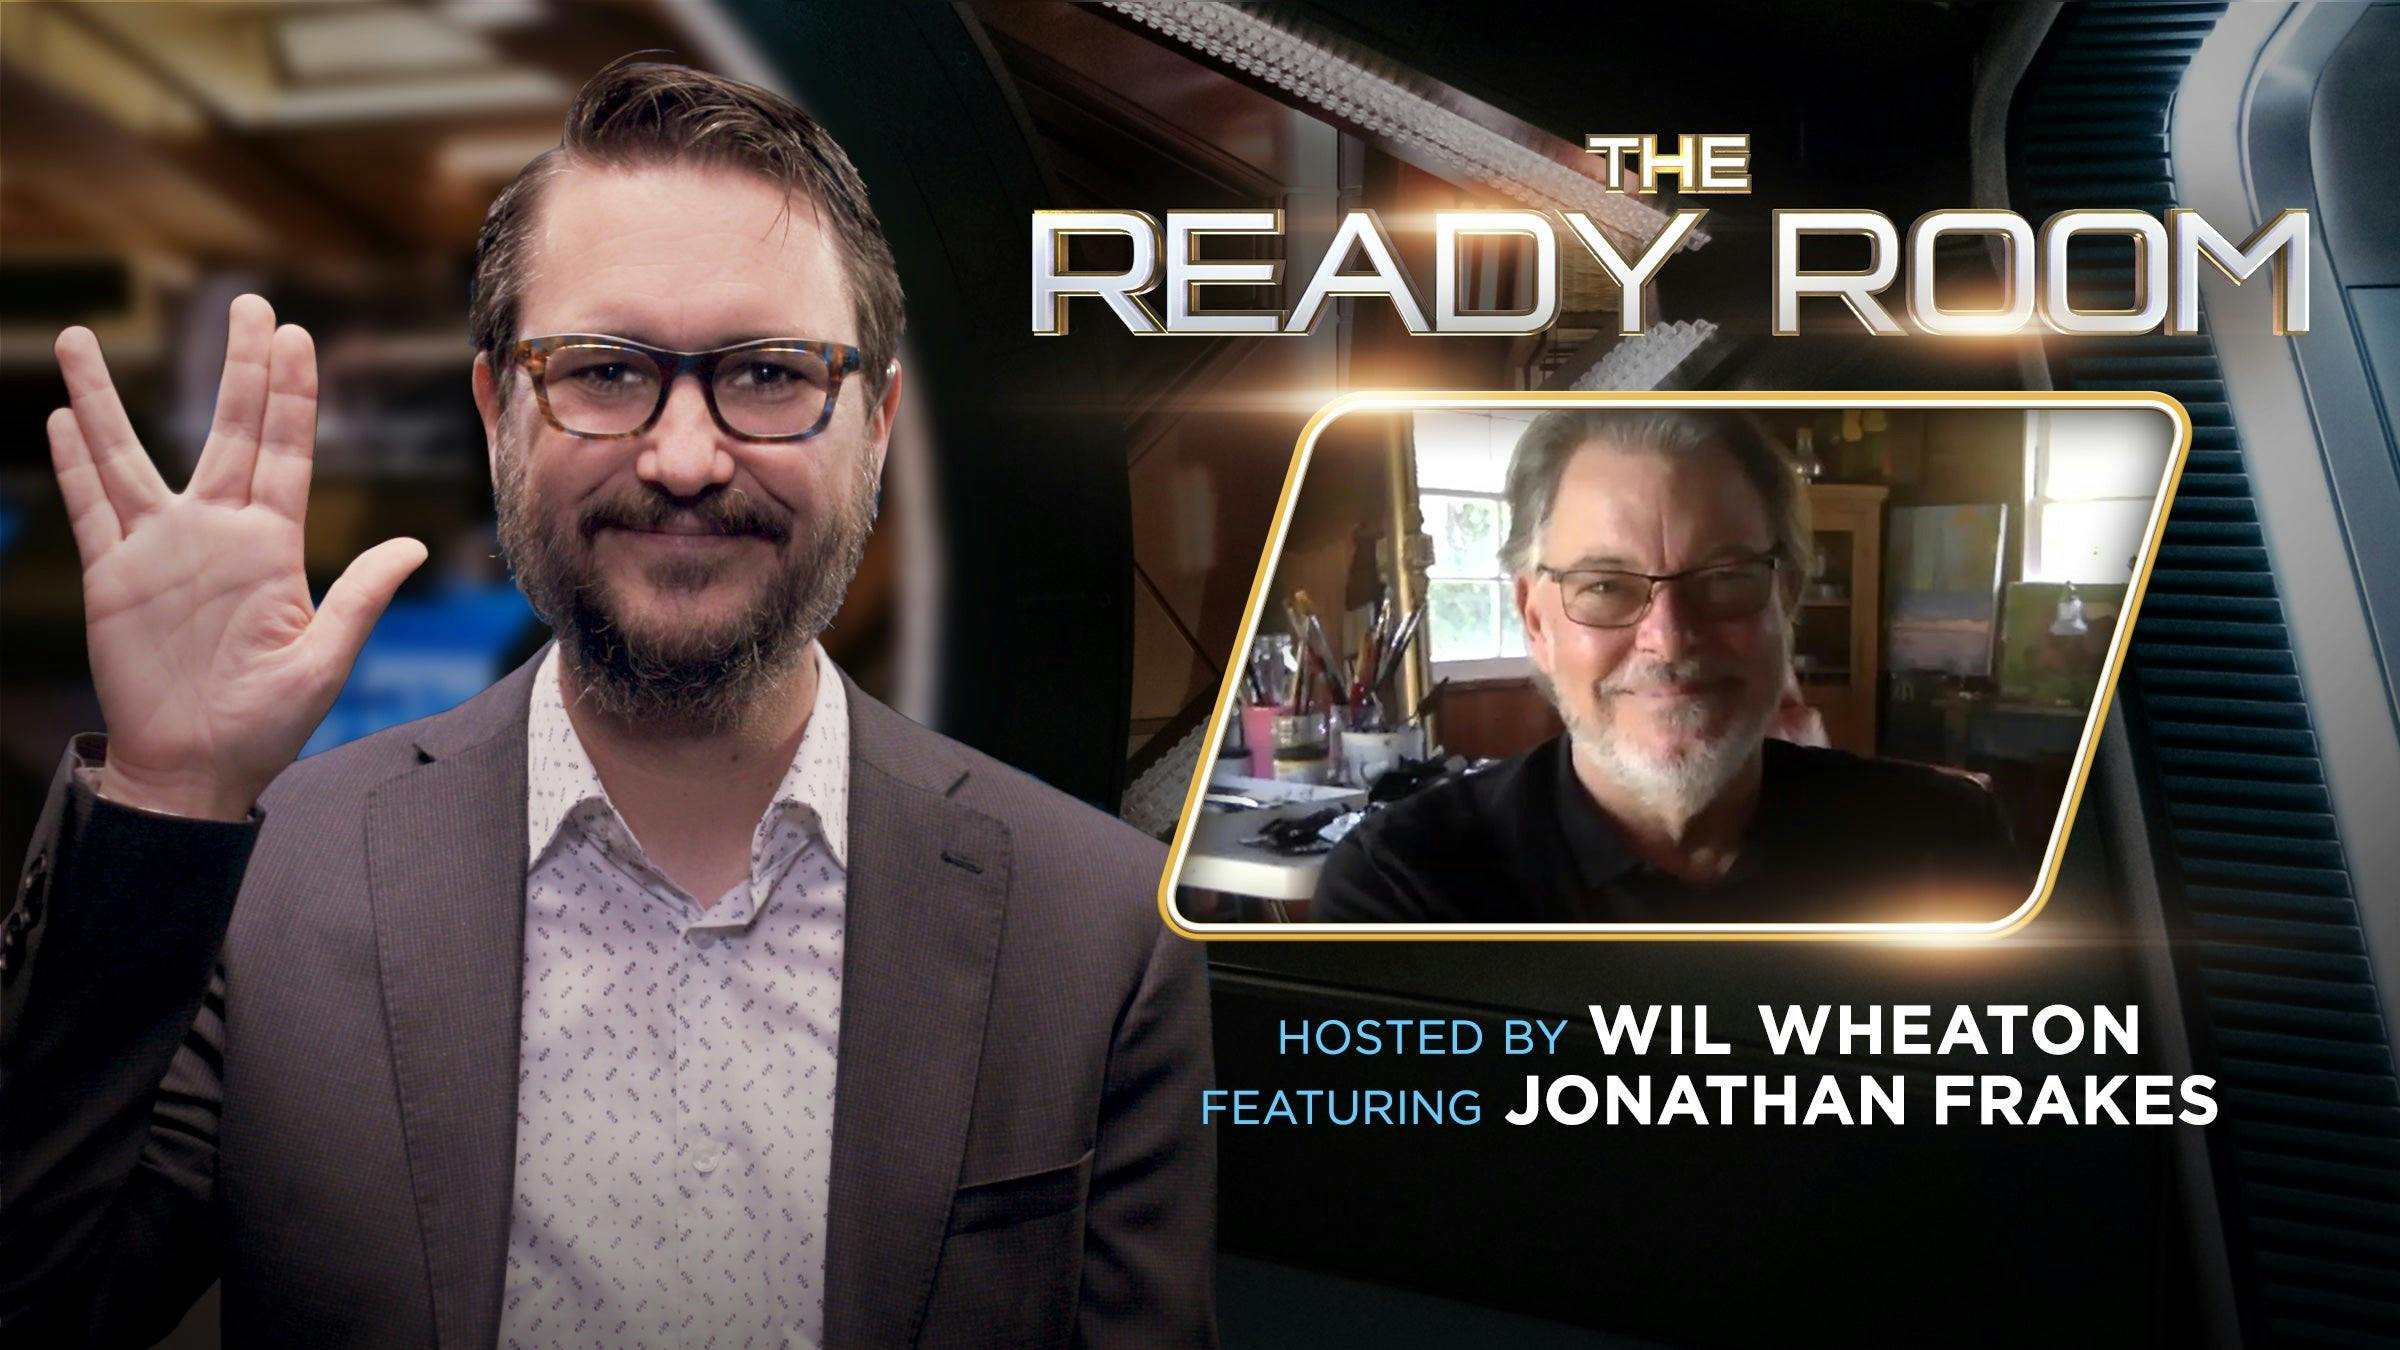 Jonathan Frakes in The Ready Room